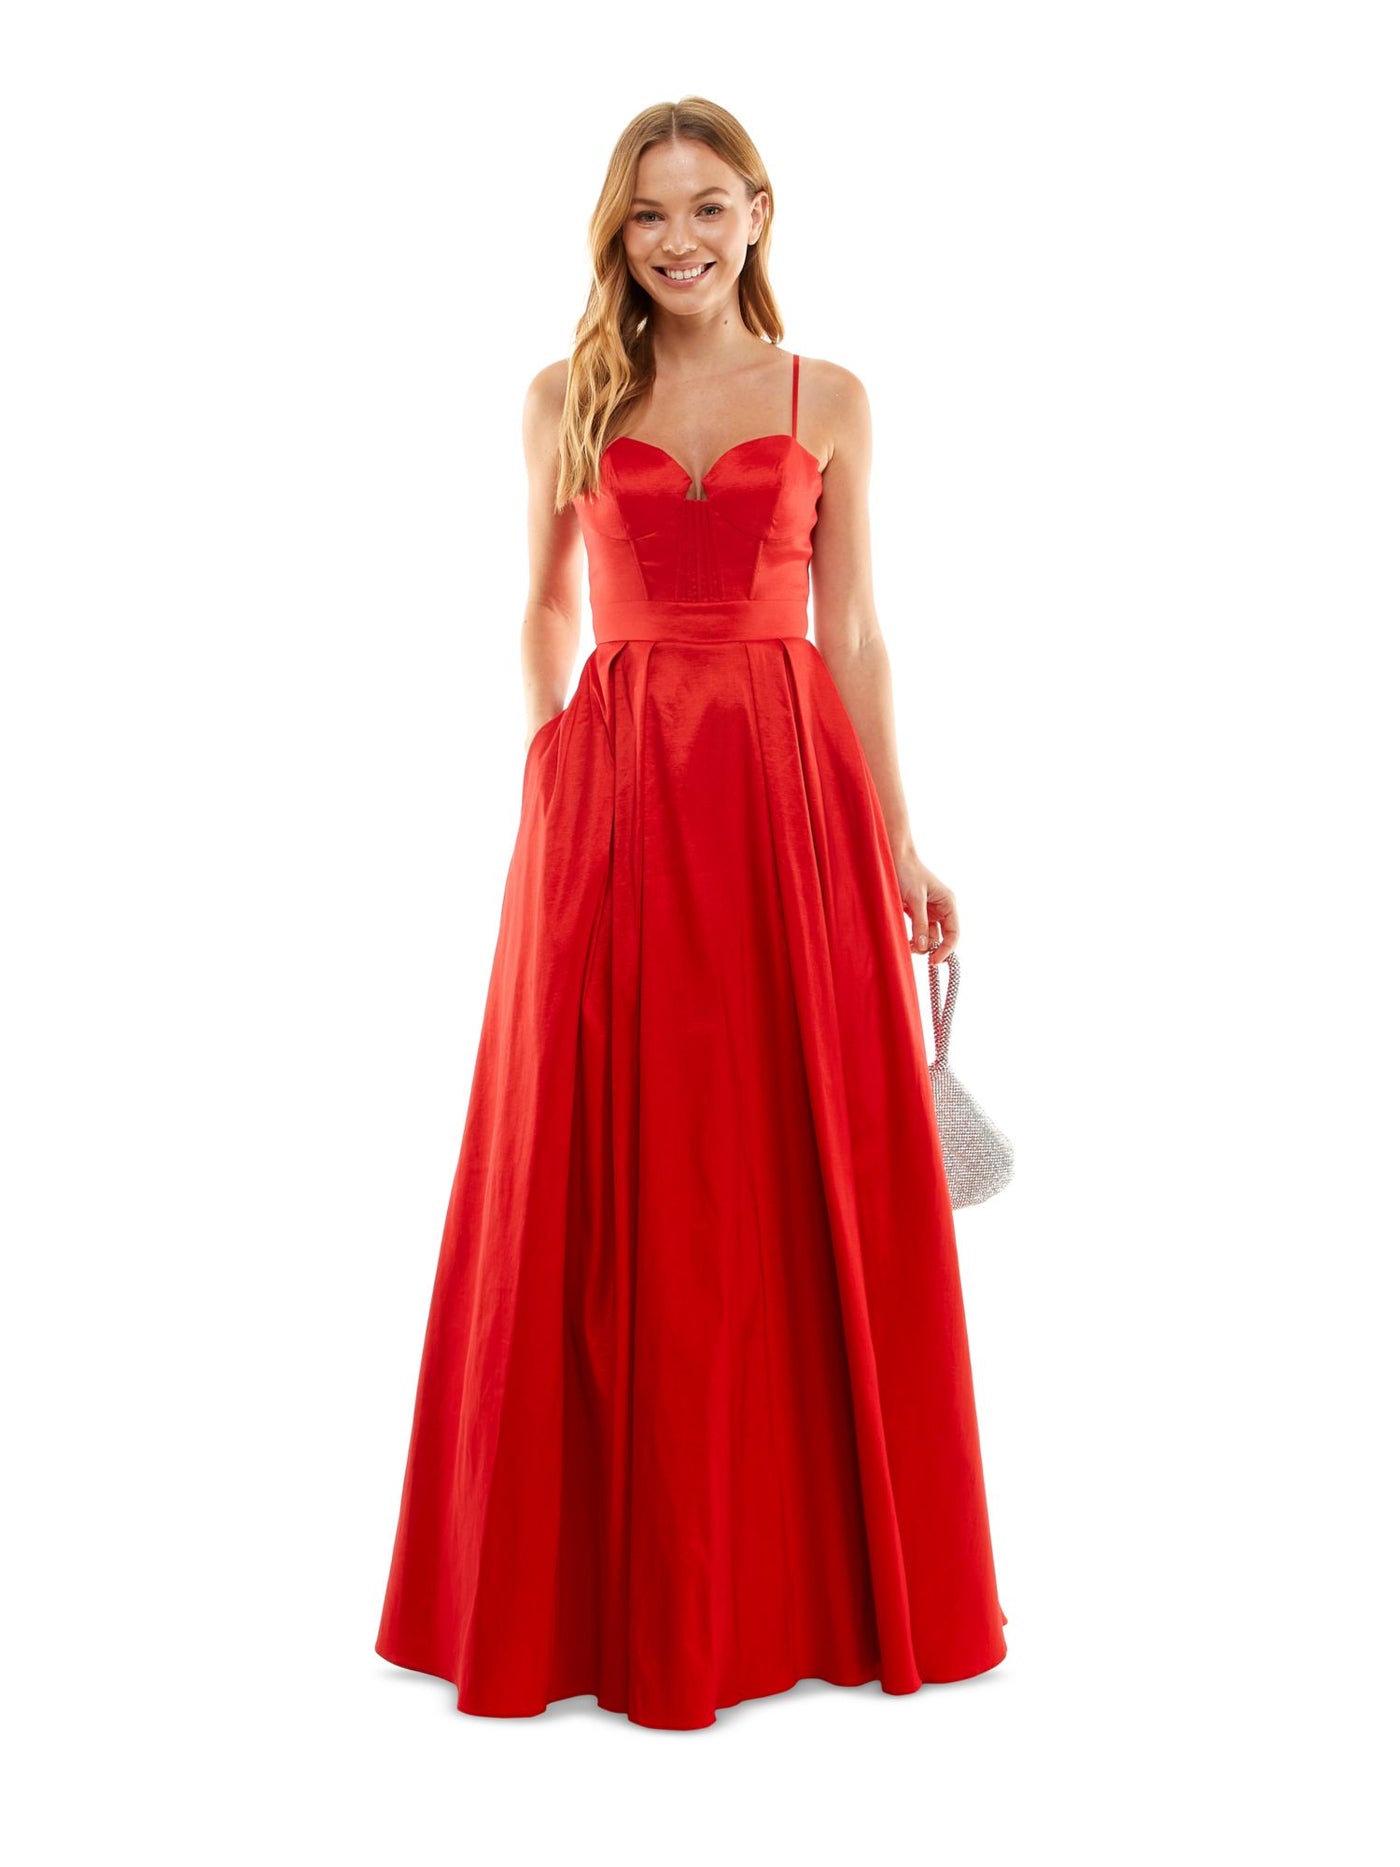 B DARLIN Womens Red Zippered Pleated Boned Corset Pocketed Lined Spaghetti Strap Sweetheart Neckline Full-Length Prom Gown Dress Juniors 0